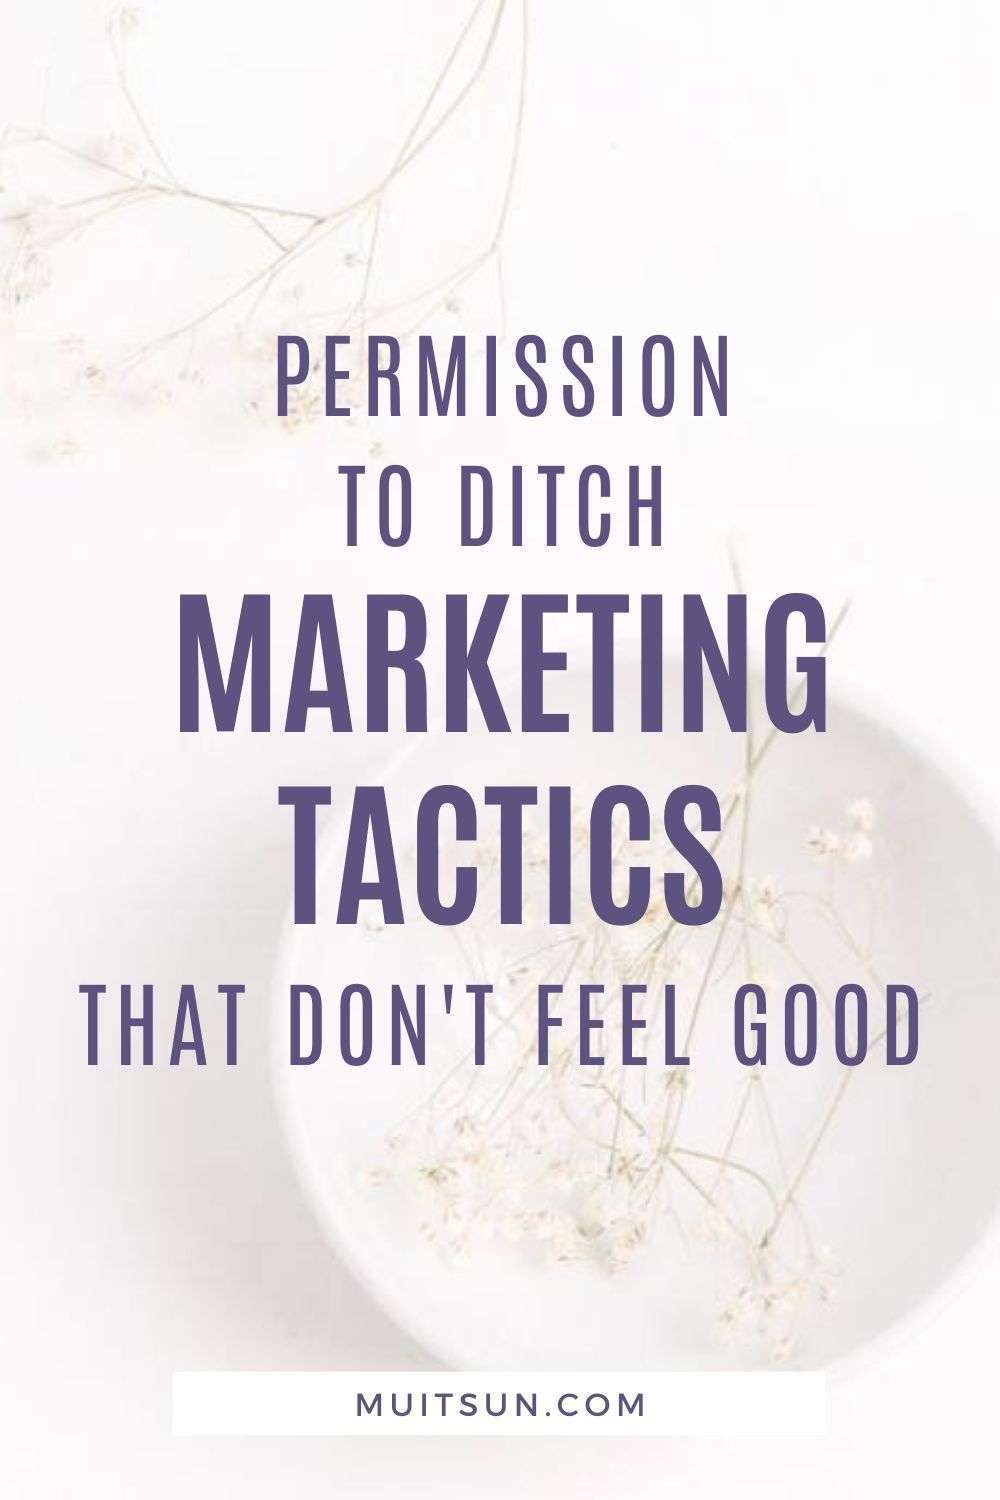 Permission to Ditch Marketing Tactics That Don't Feel Good